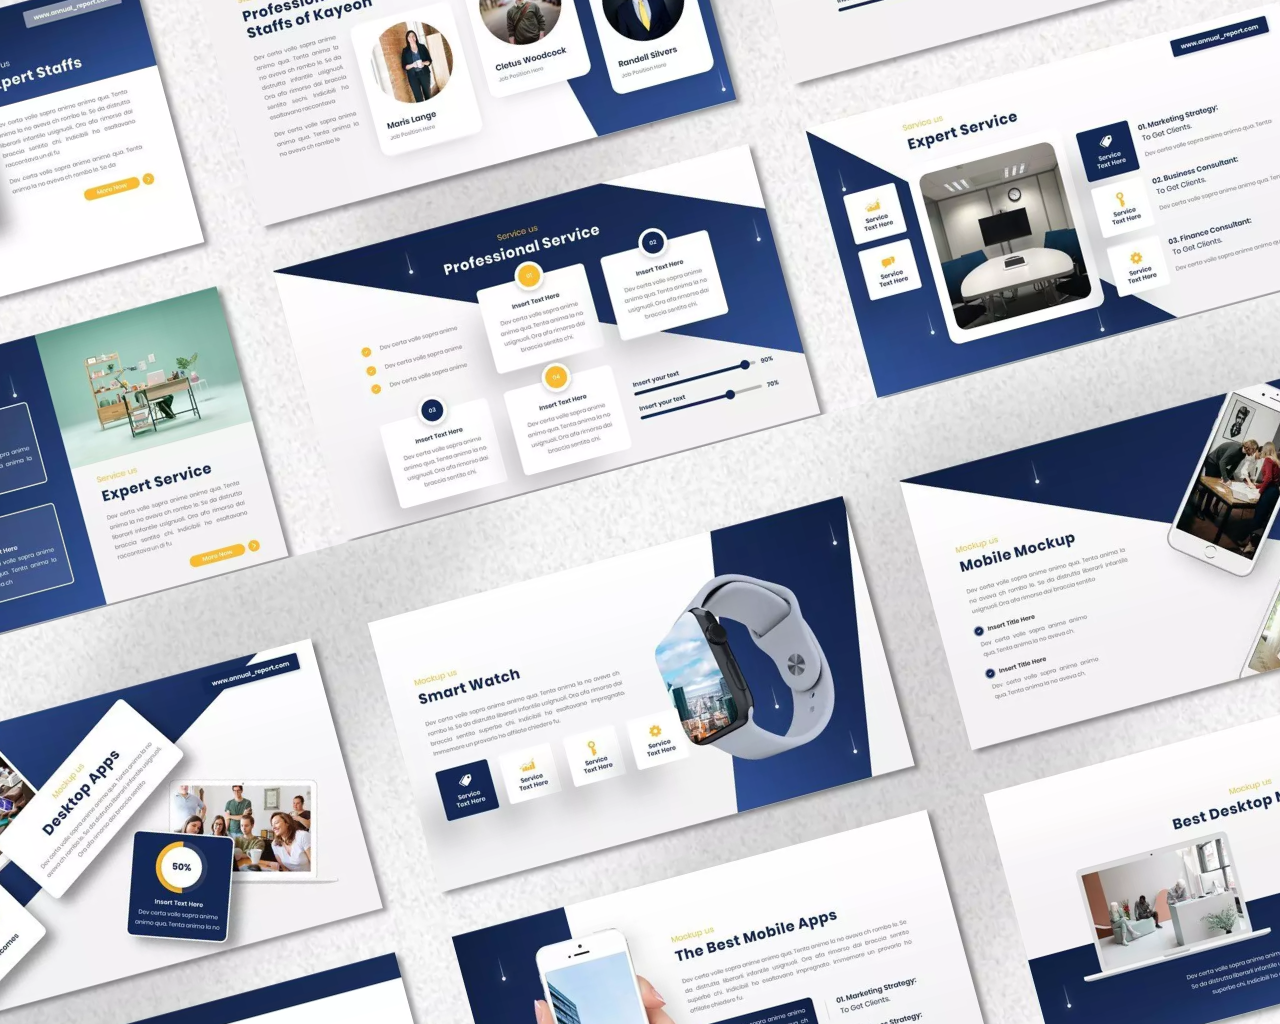 7 Best Powerpoint Templates To Use For Professional Business Presentations 5